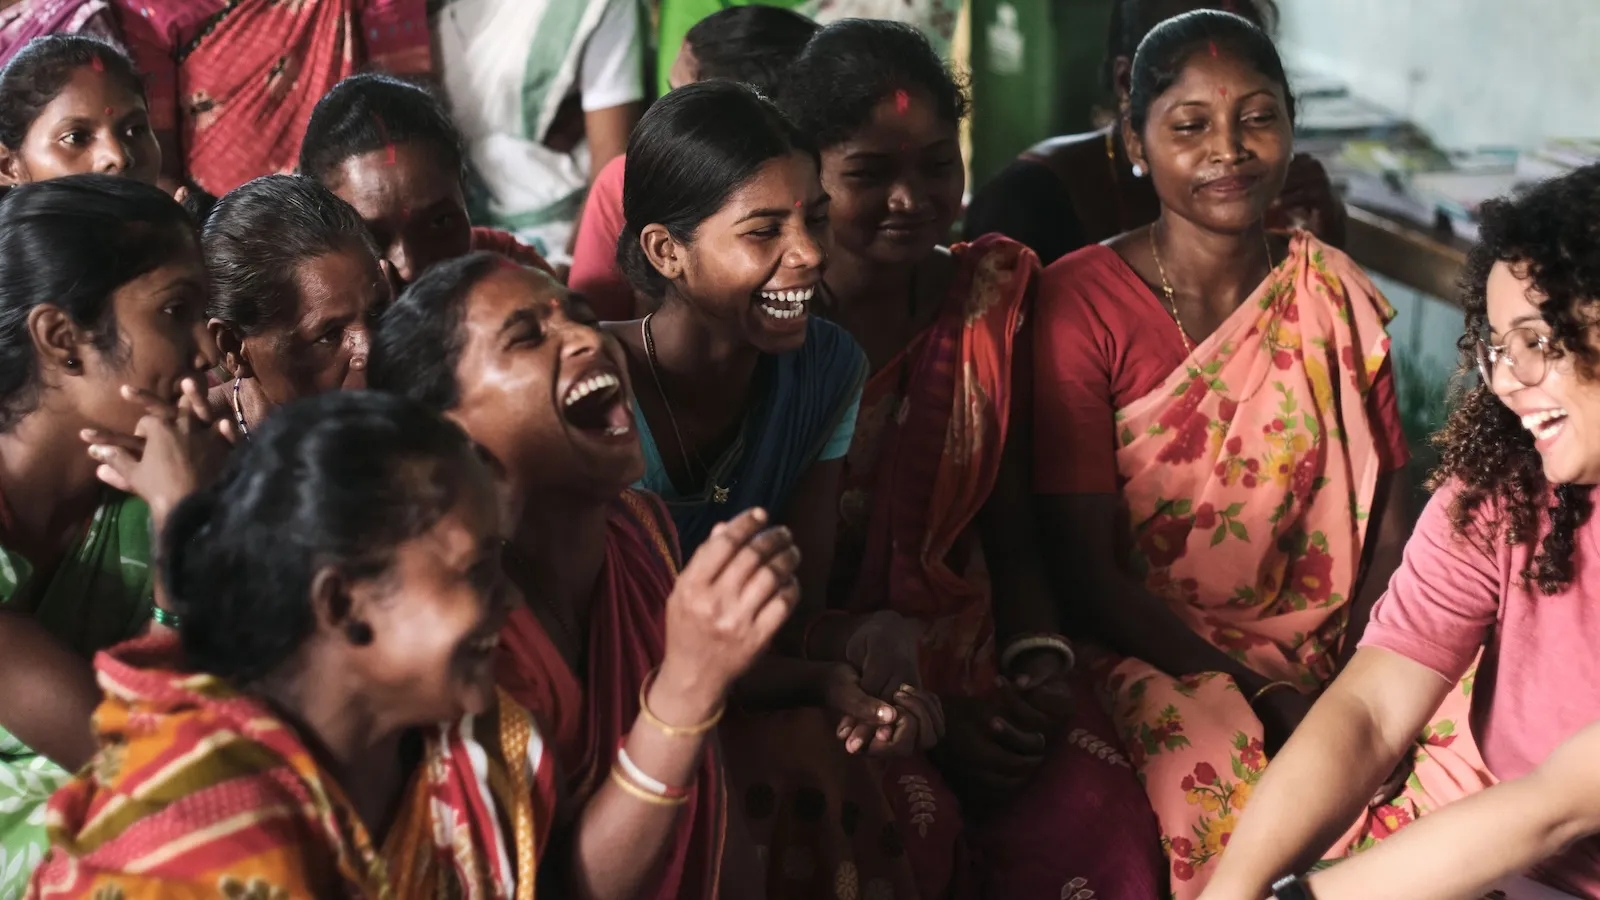 A group of Indian women laughing.